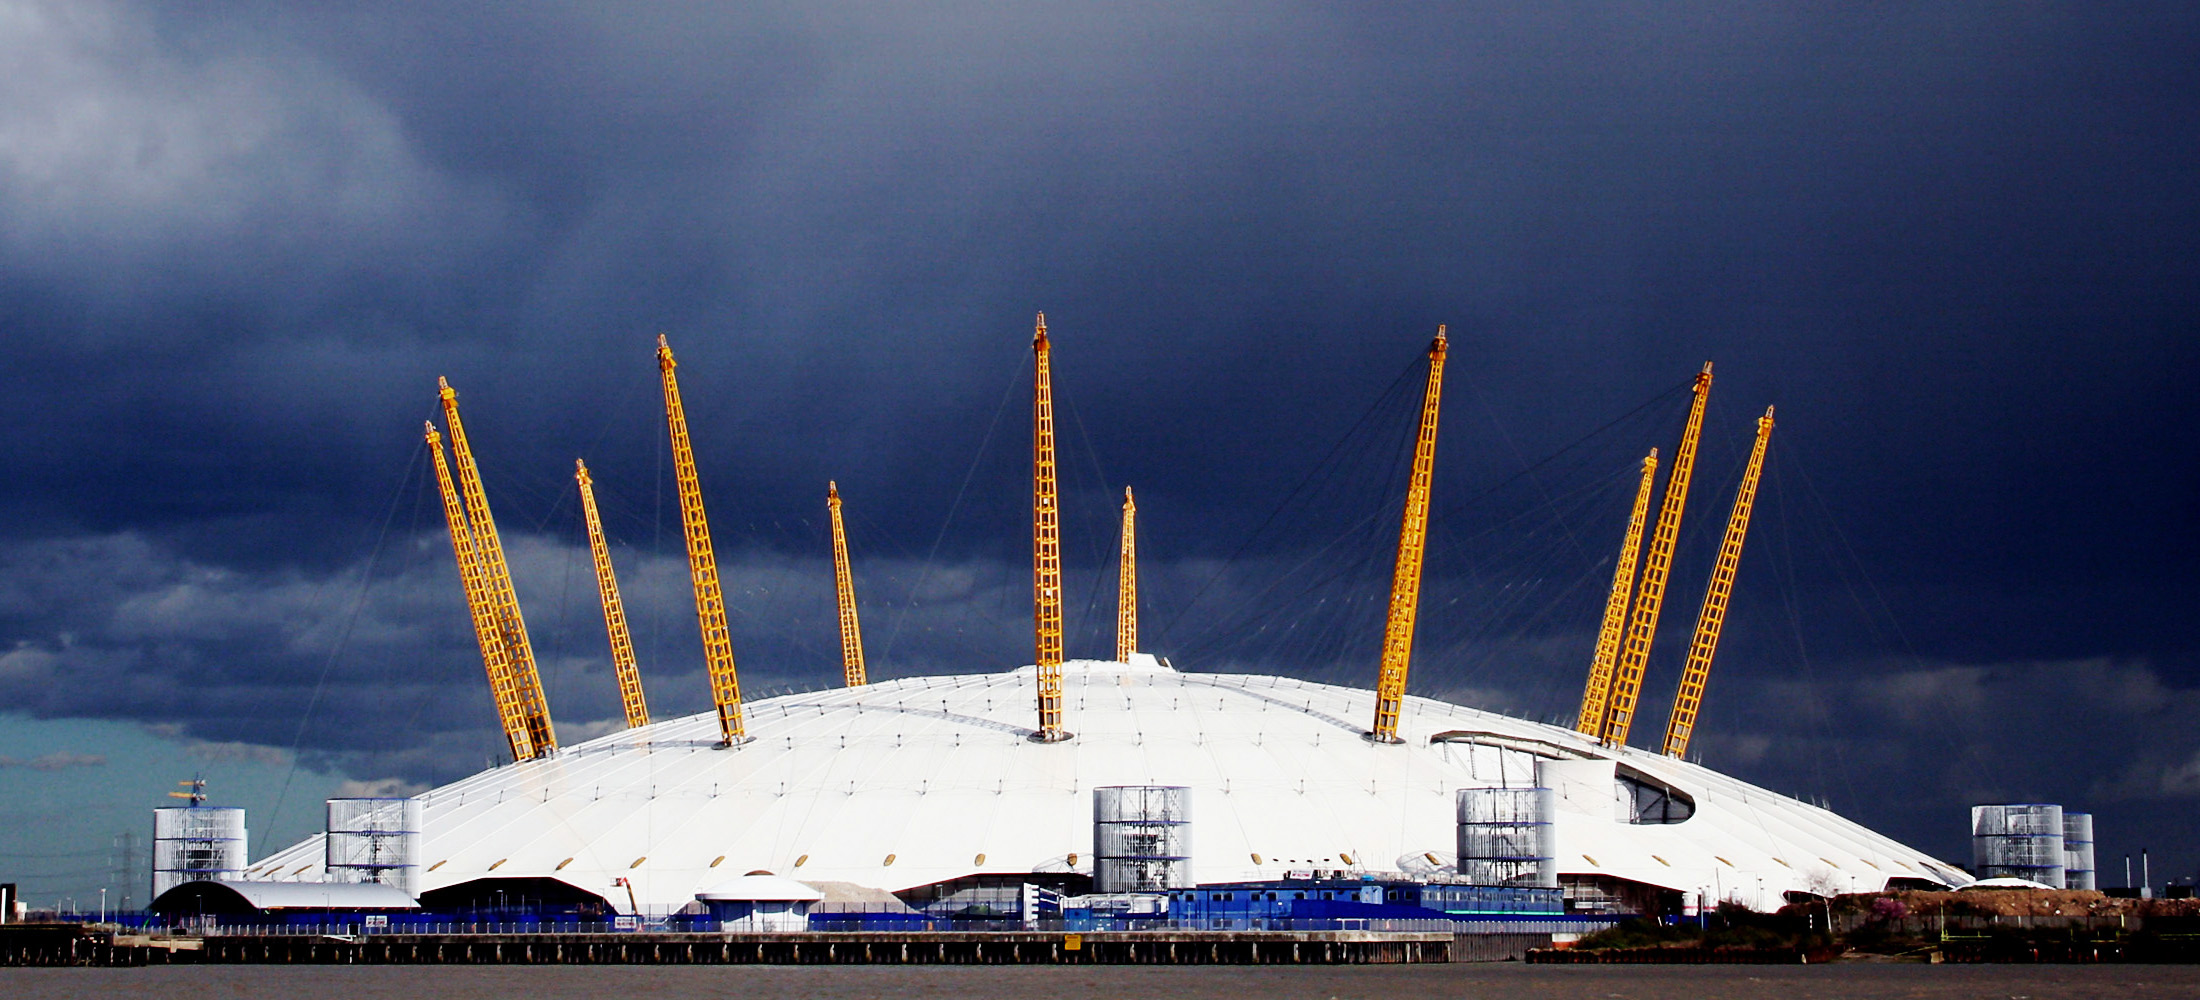 The O2 Arena (Source: Wikimedia Commons)